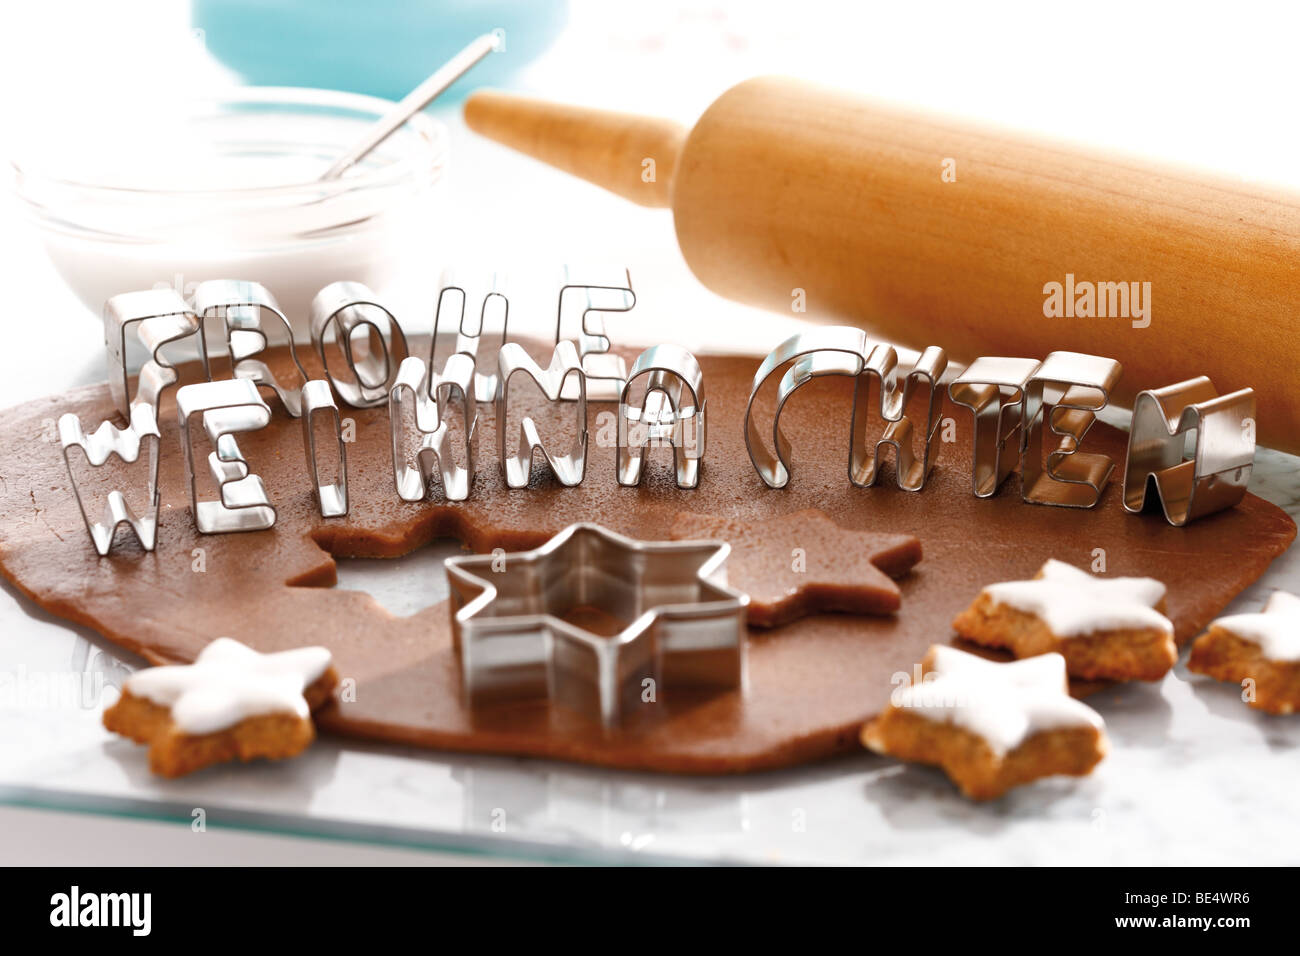 Cutting out cinnamon cookies, baking Stock Photo